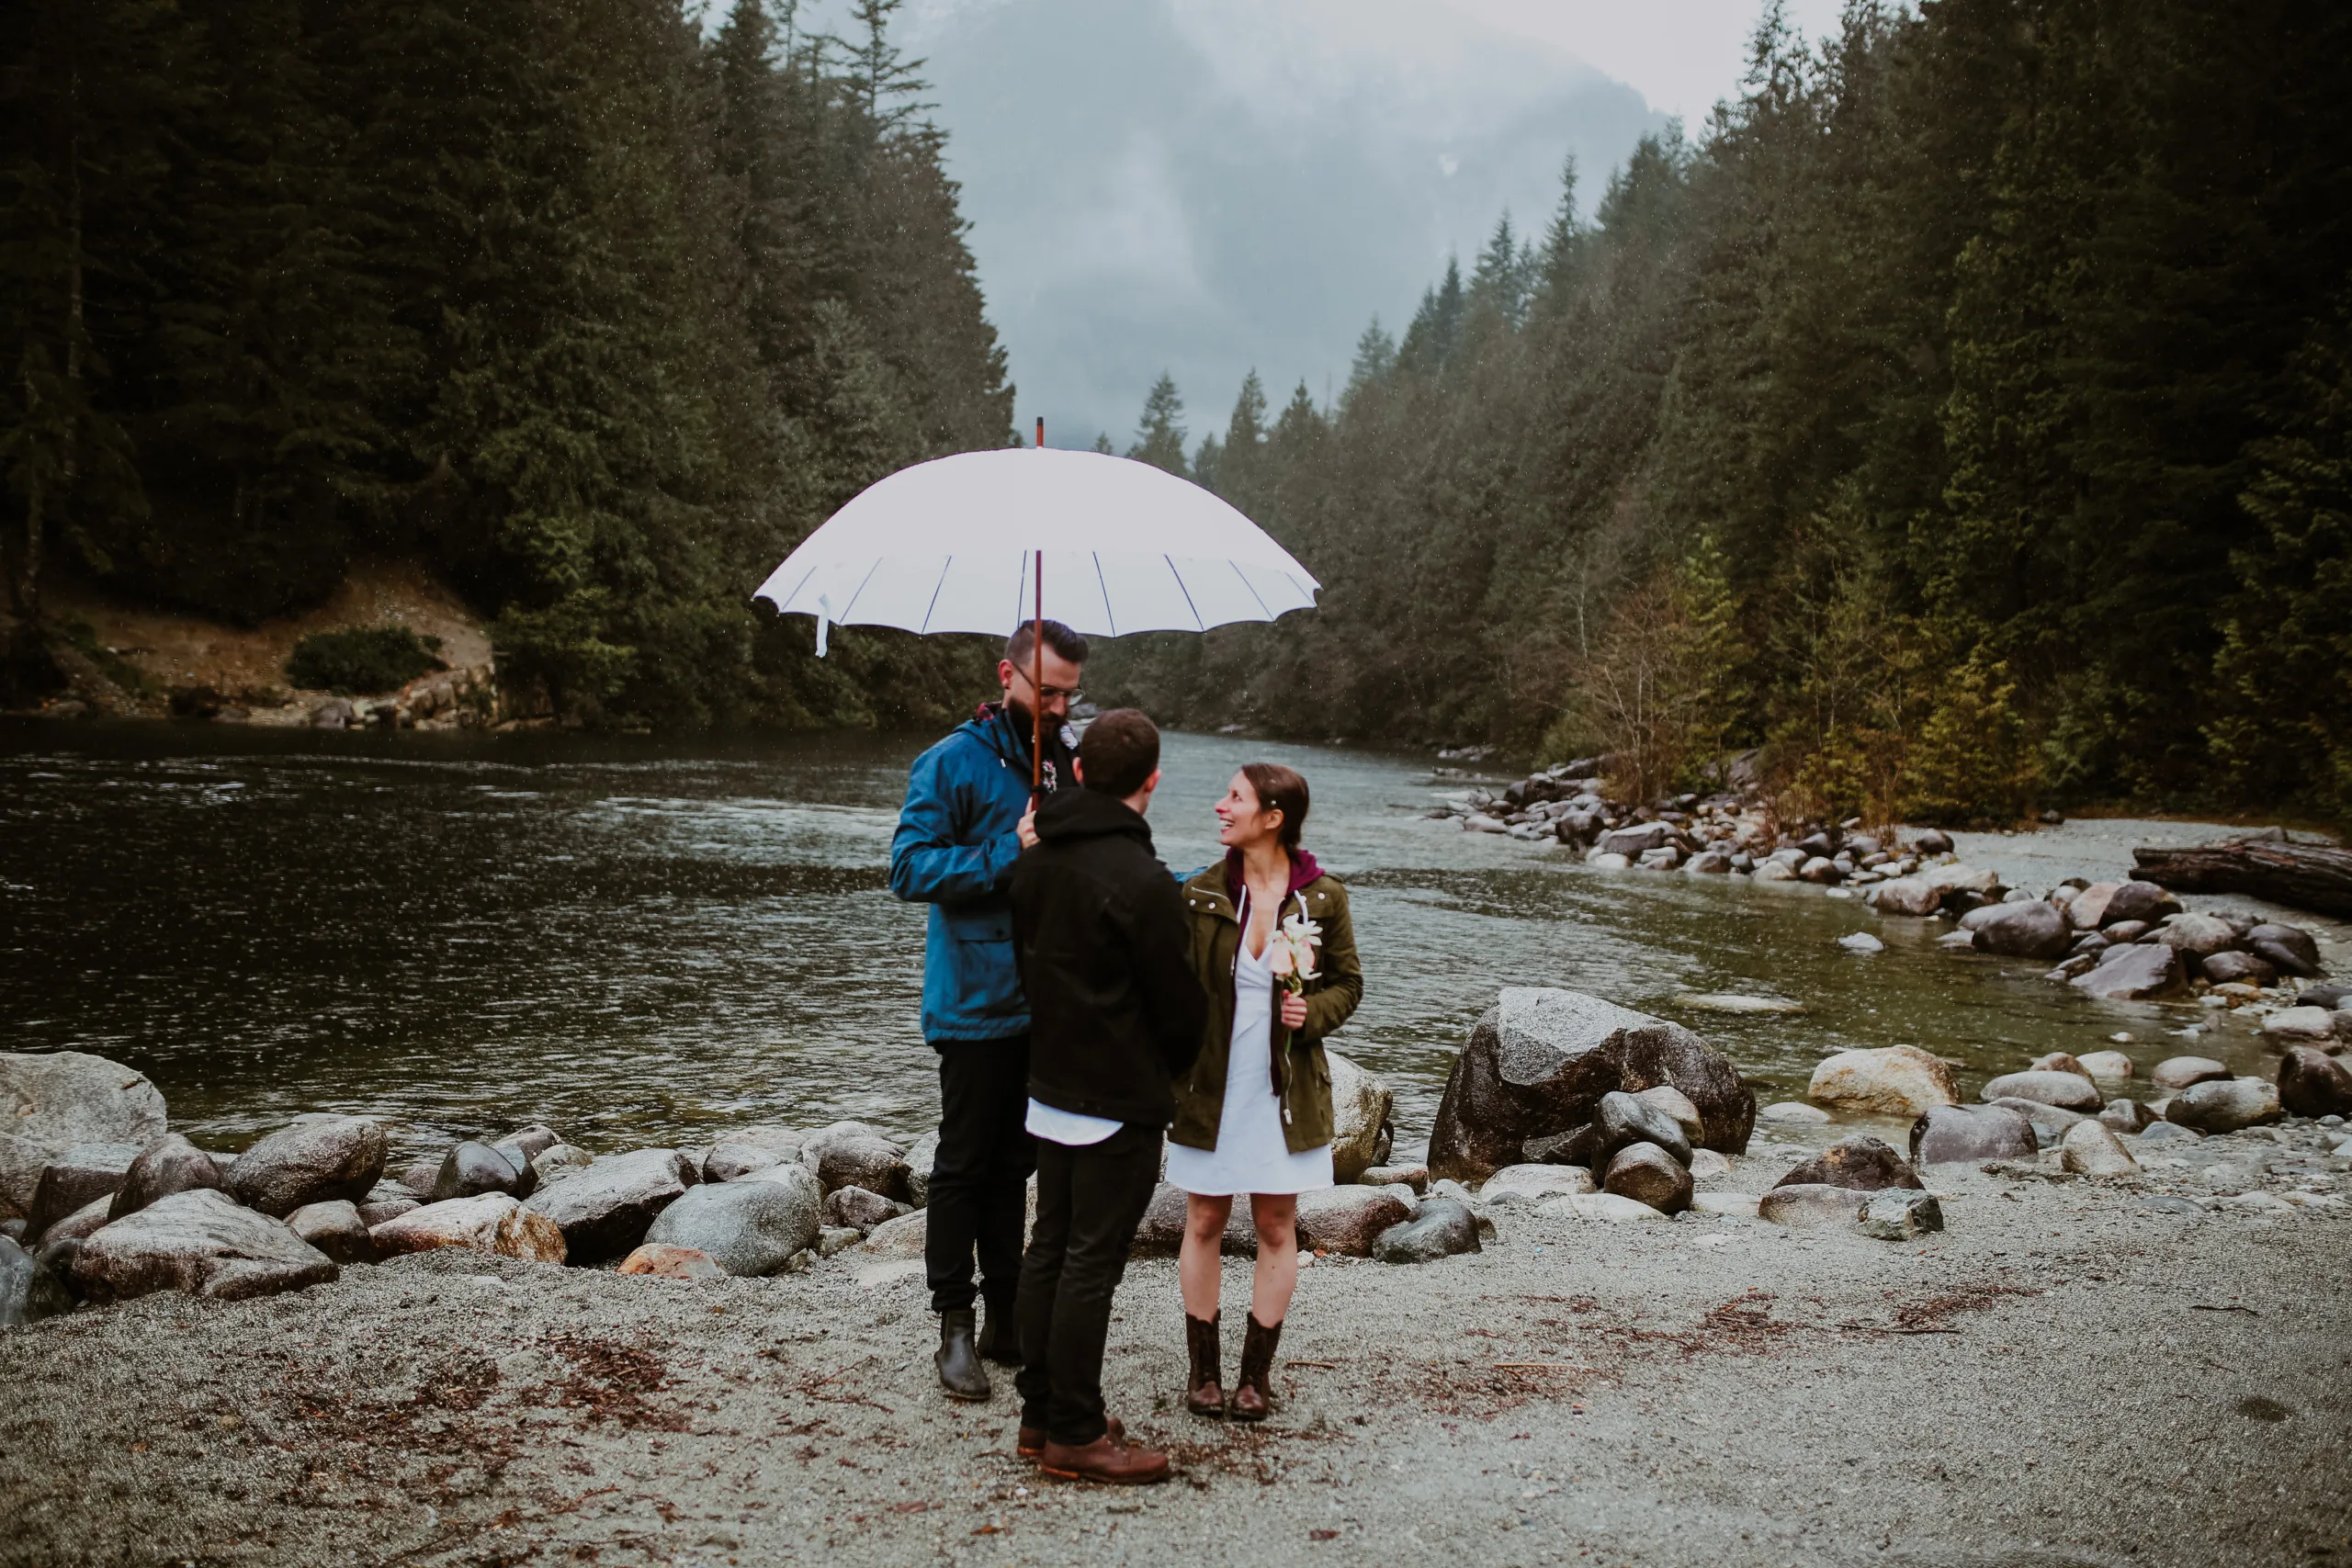 Shawn officiating an elopement in the rain with Caitlin and Christopher